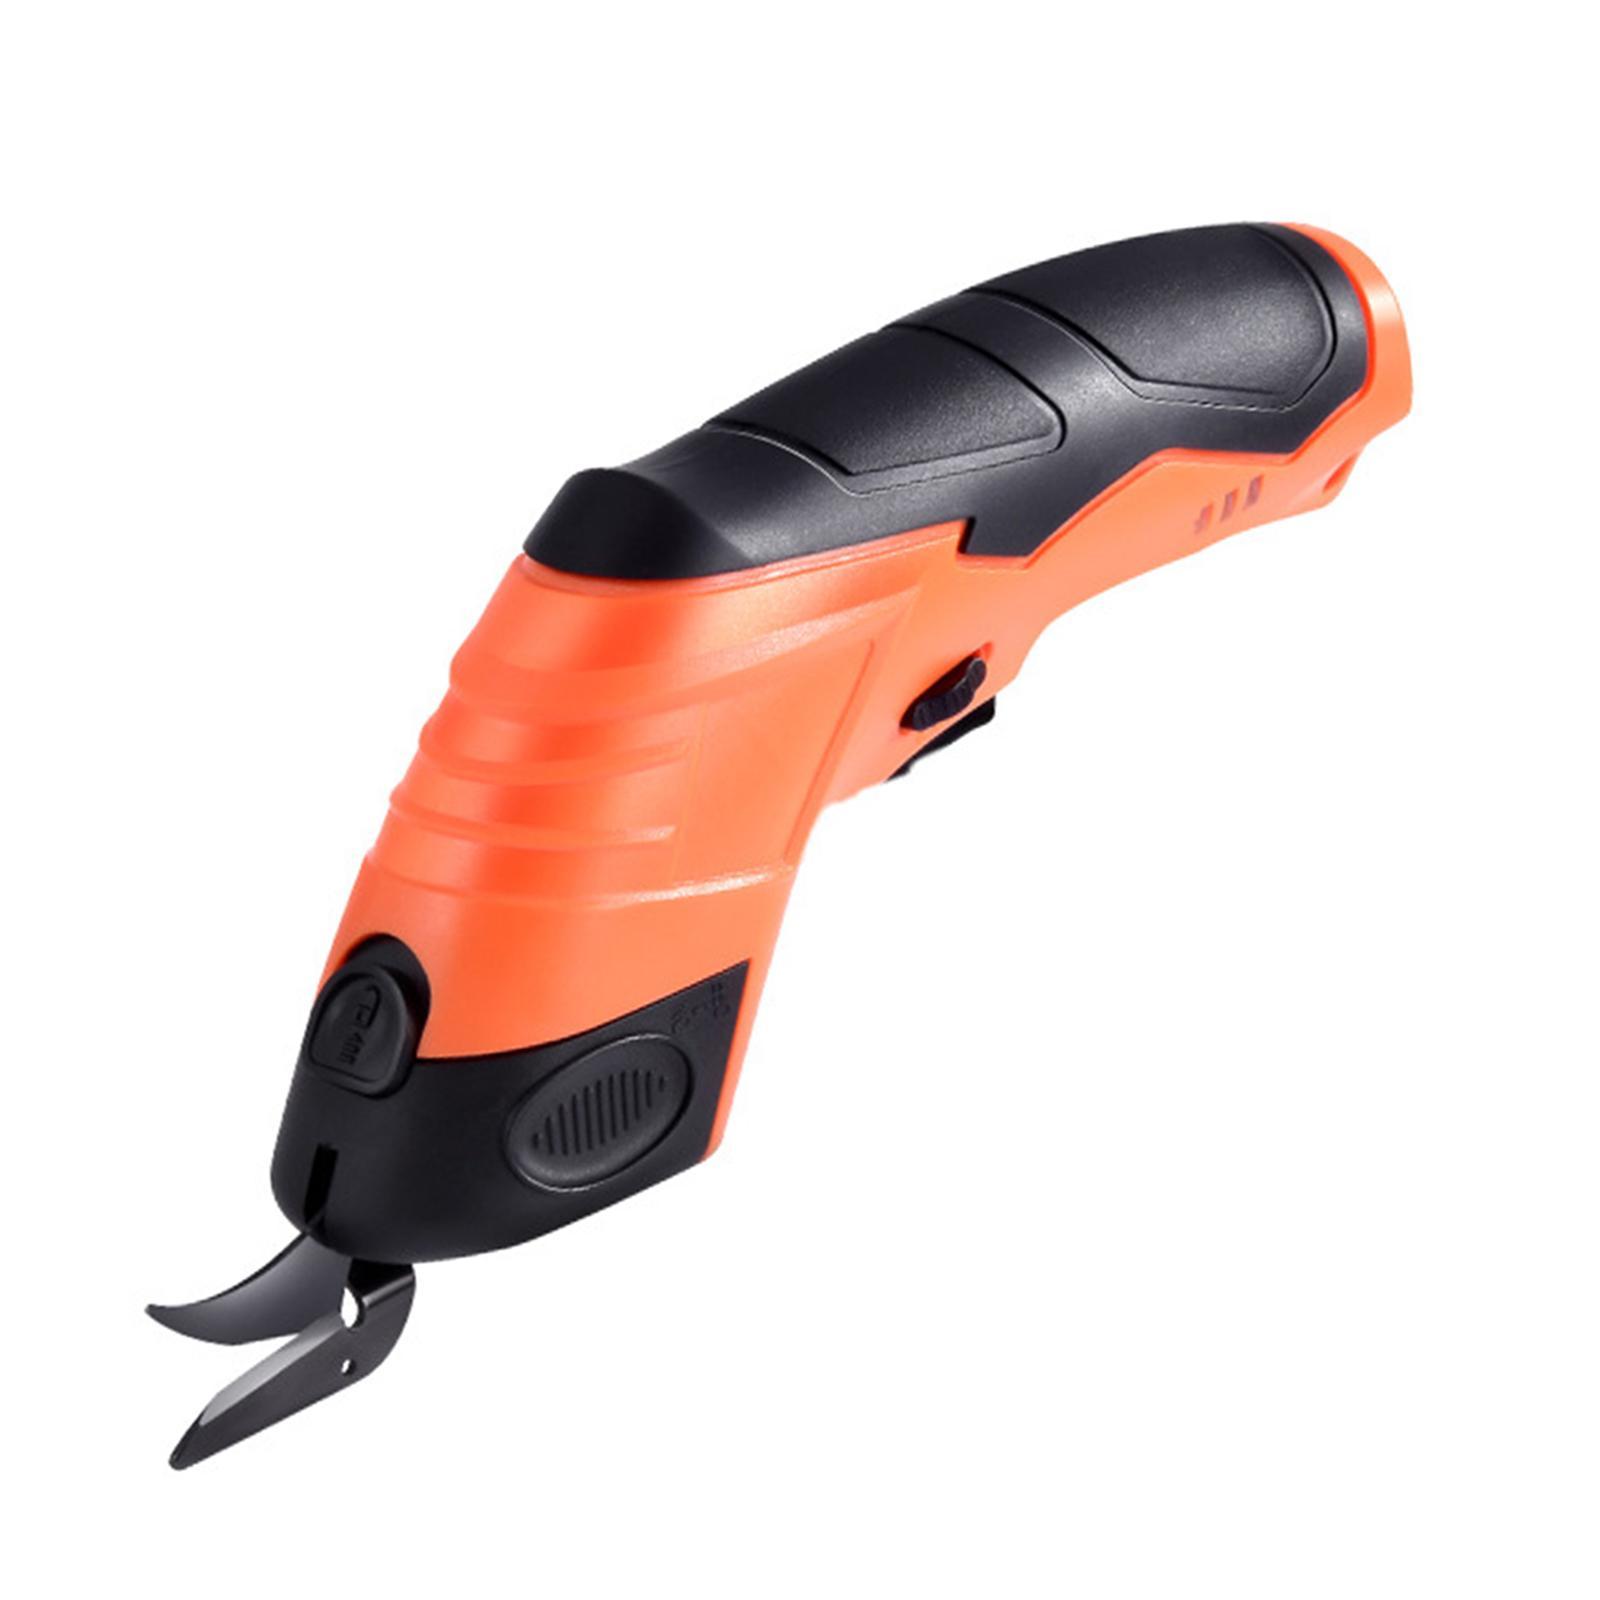 Cordless Electric Scissors USB Rechargeable Cutter Fabric Cutter